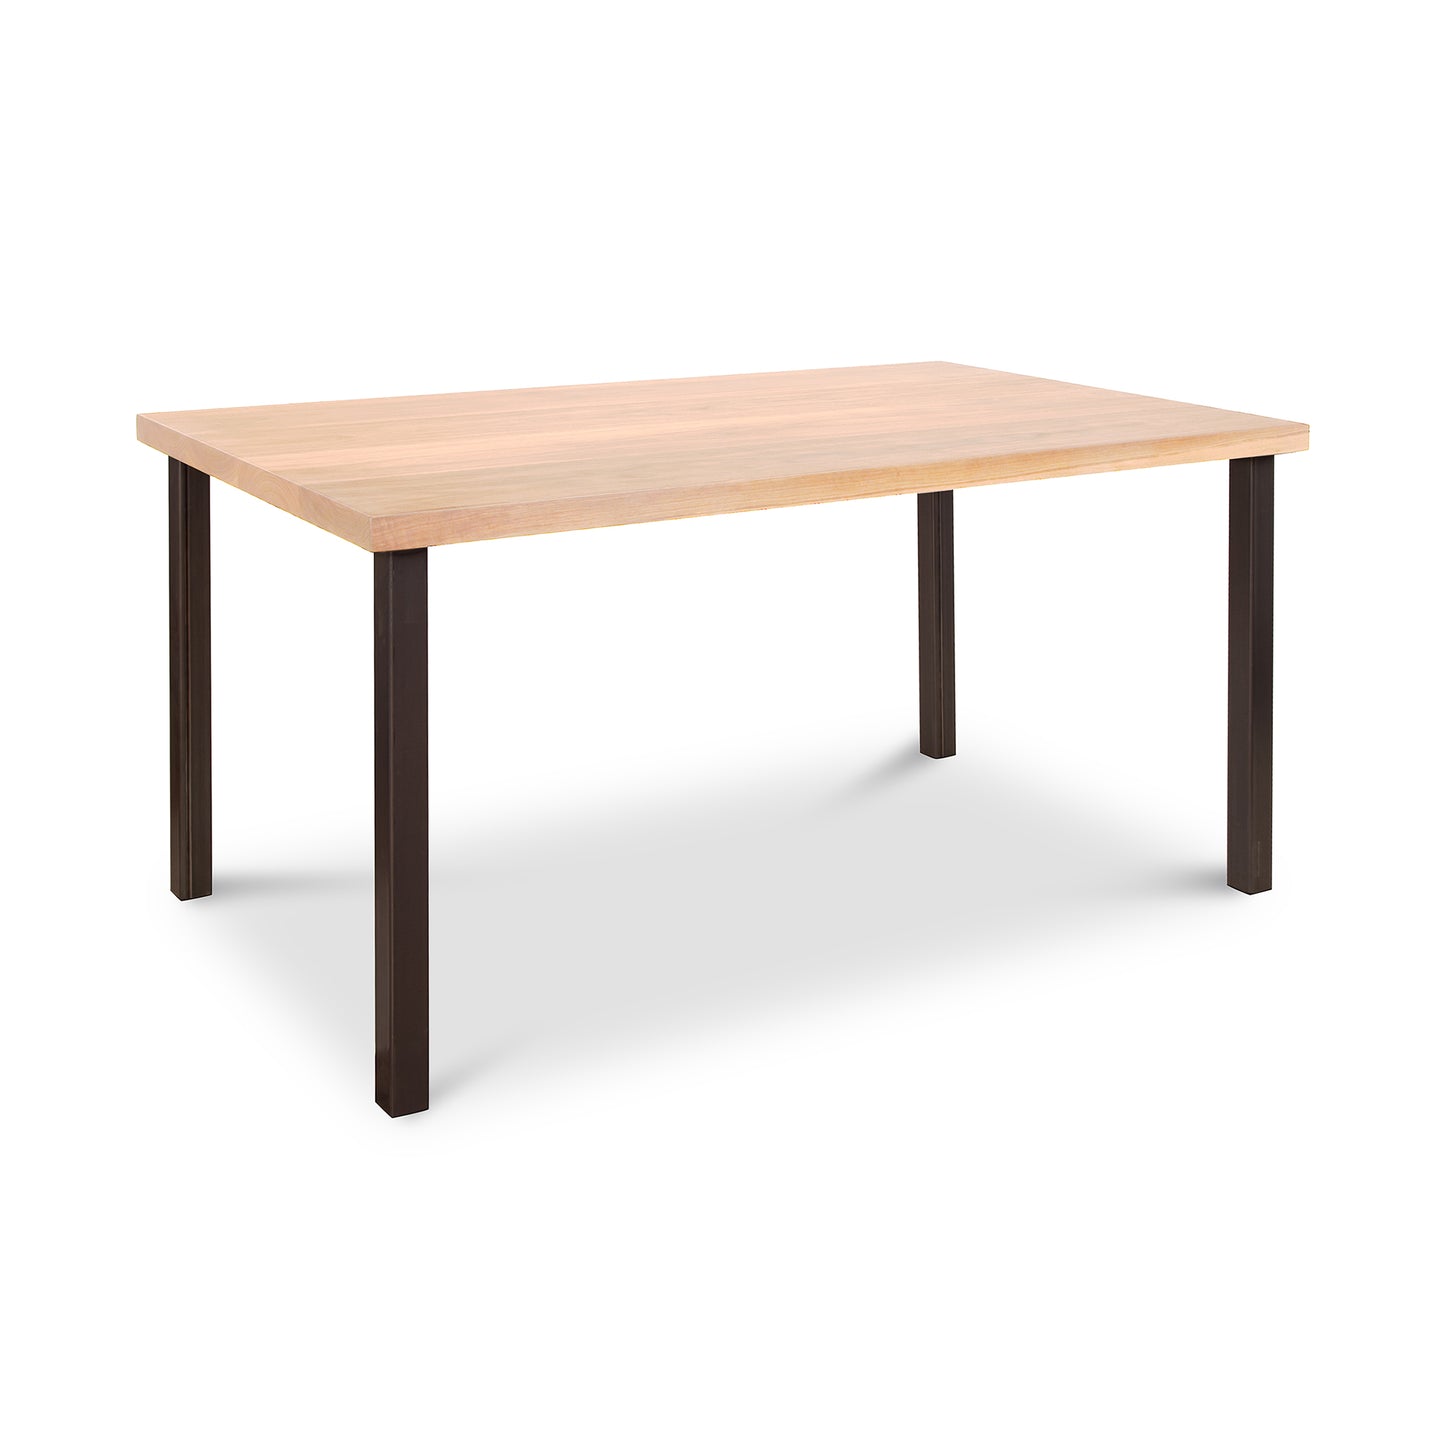 An Modern Industrial Table by Vermont Woods Studios with black legs on a white background.